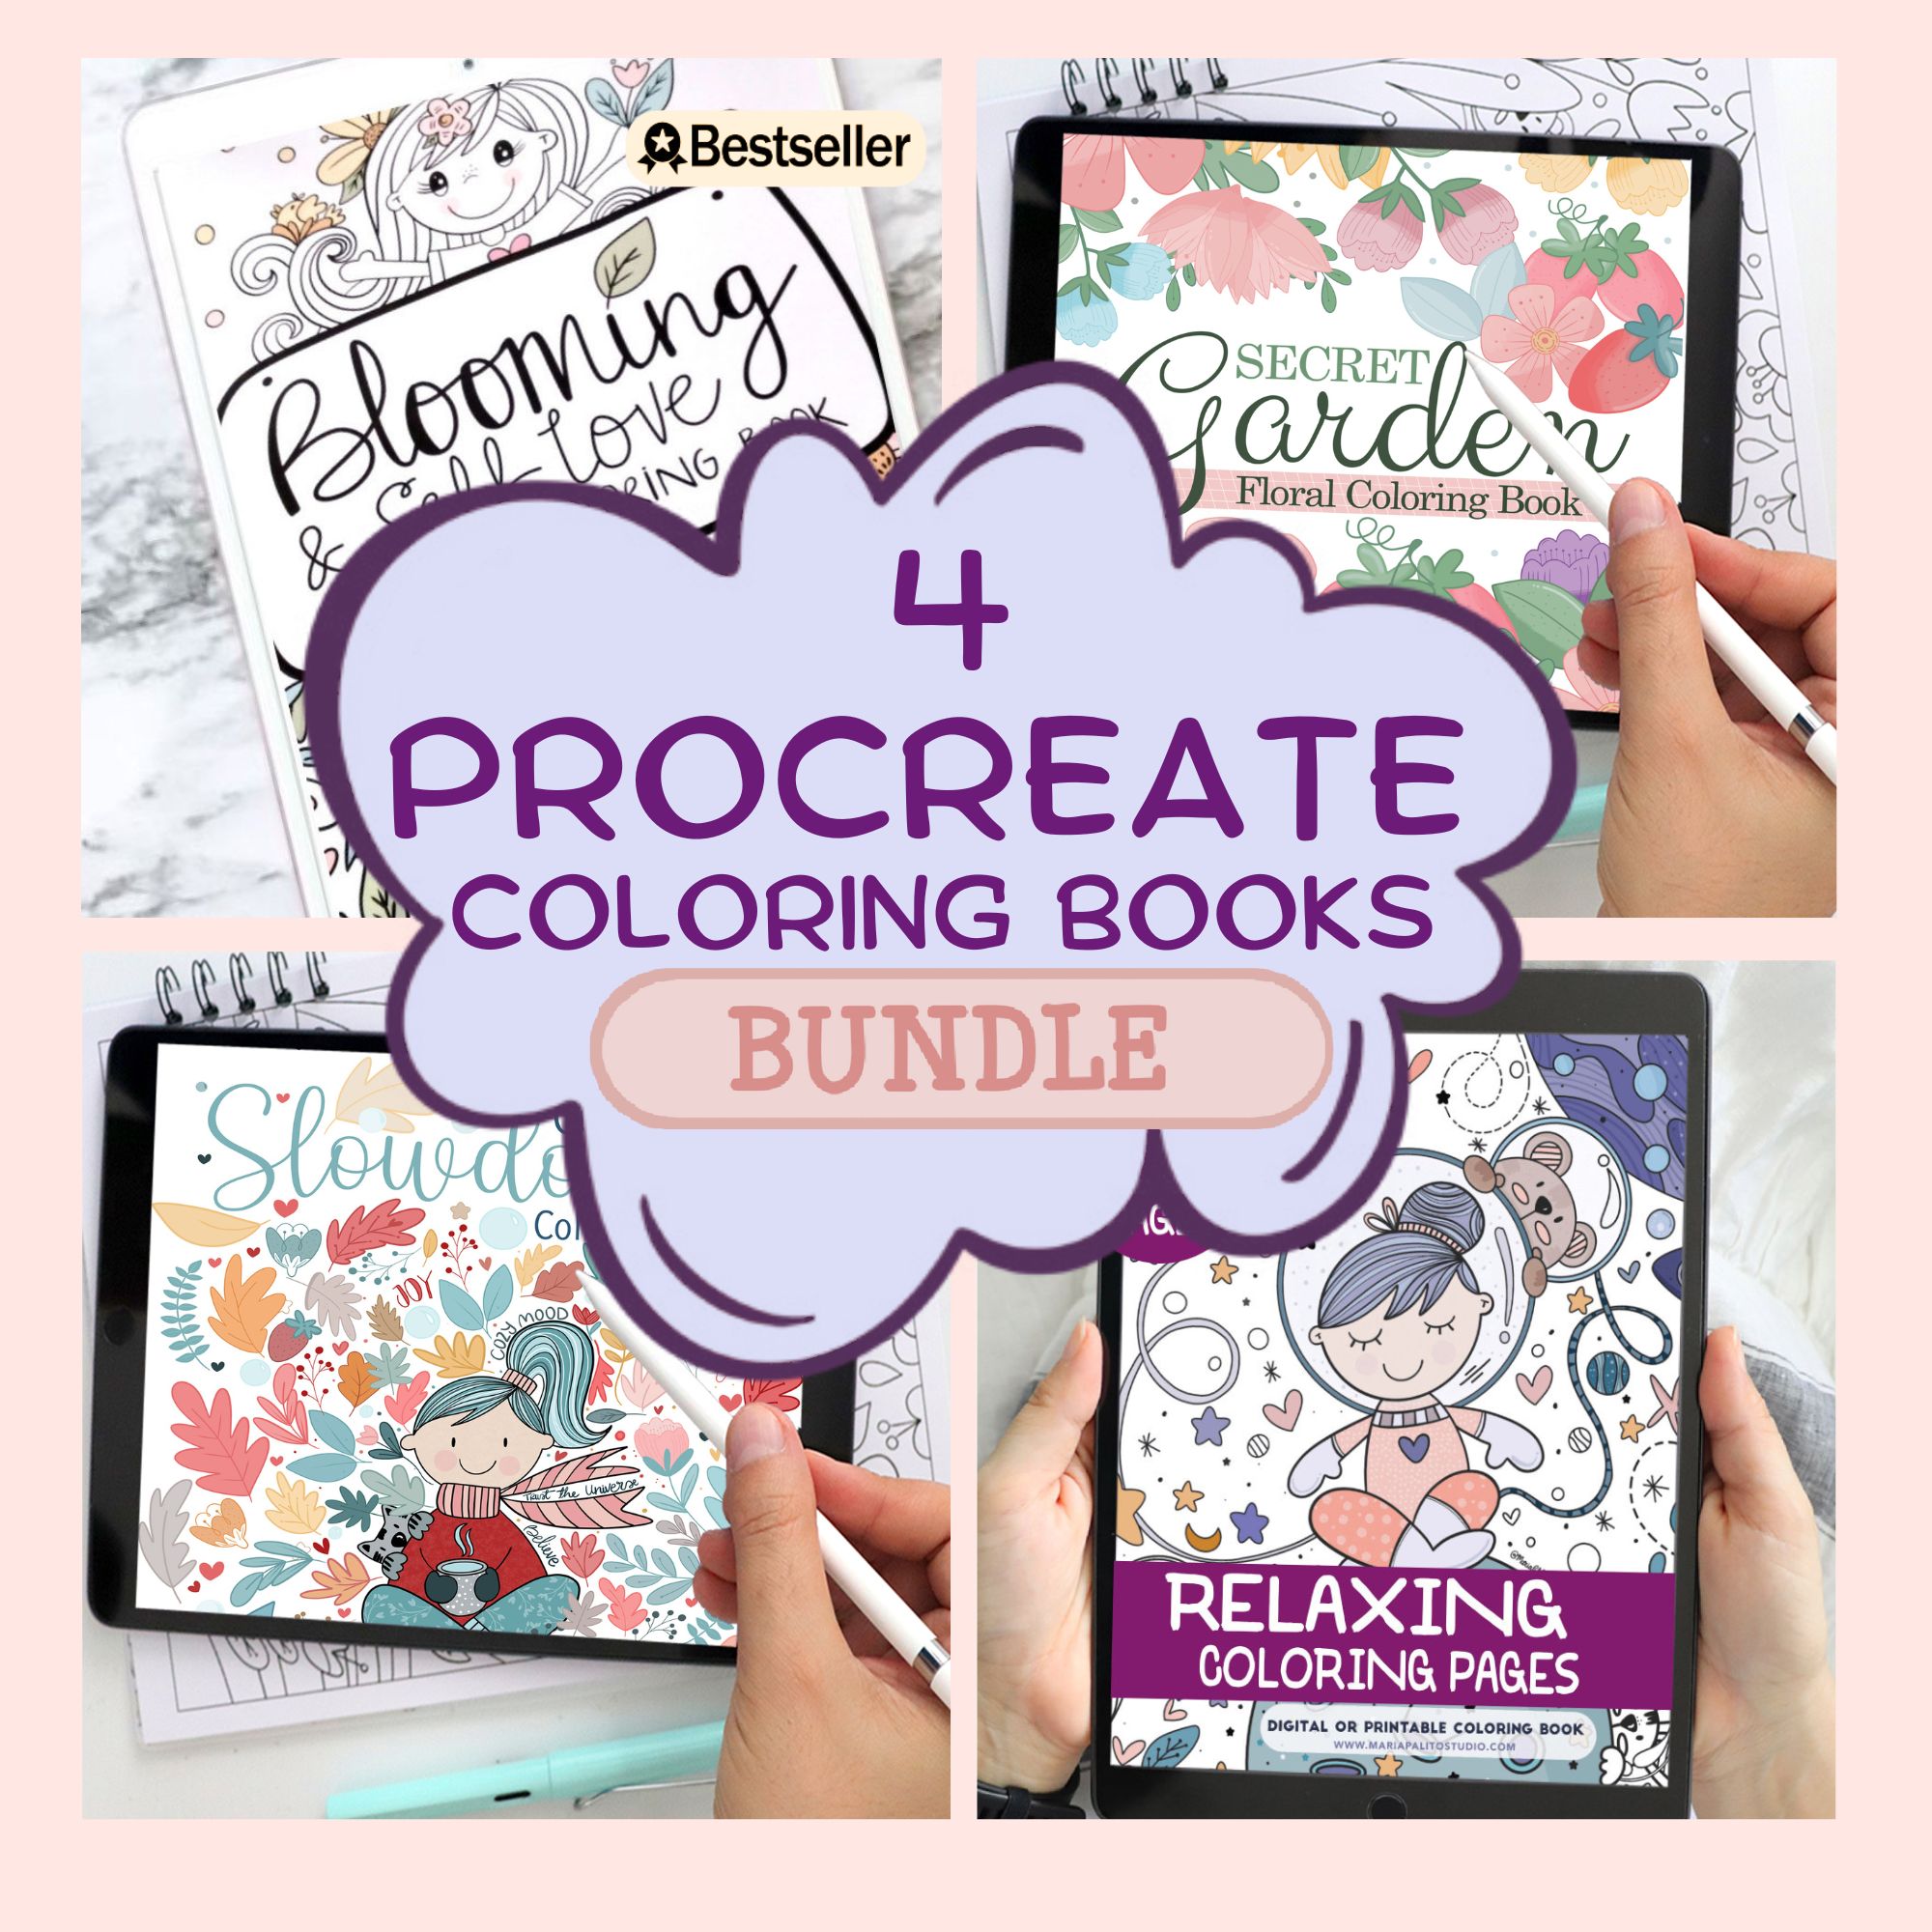 B-THERE Adult Coloring Books - Set of 4 Coloring Books